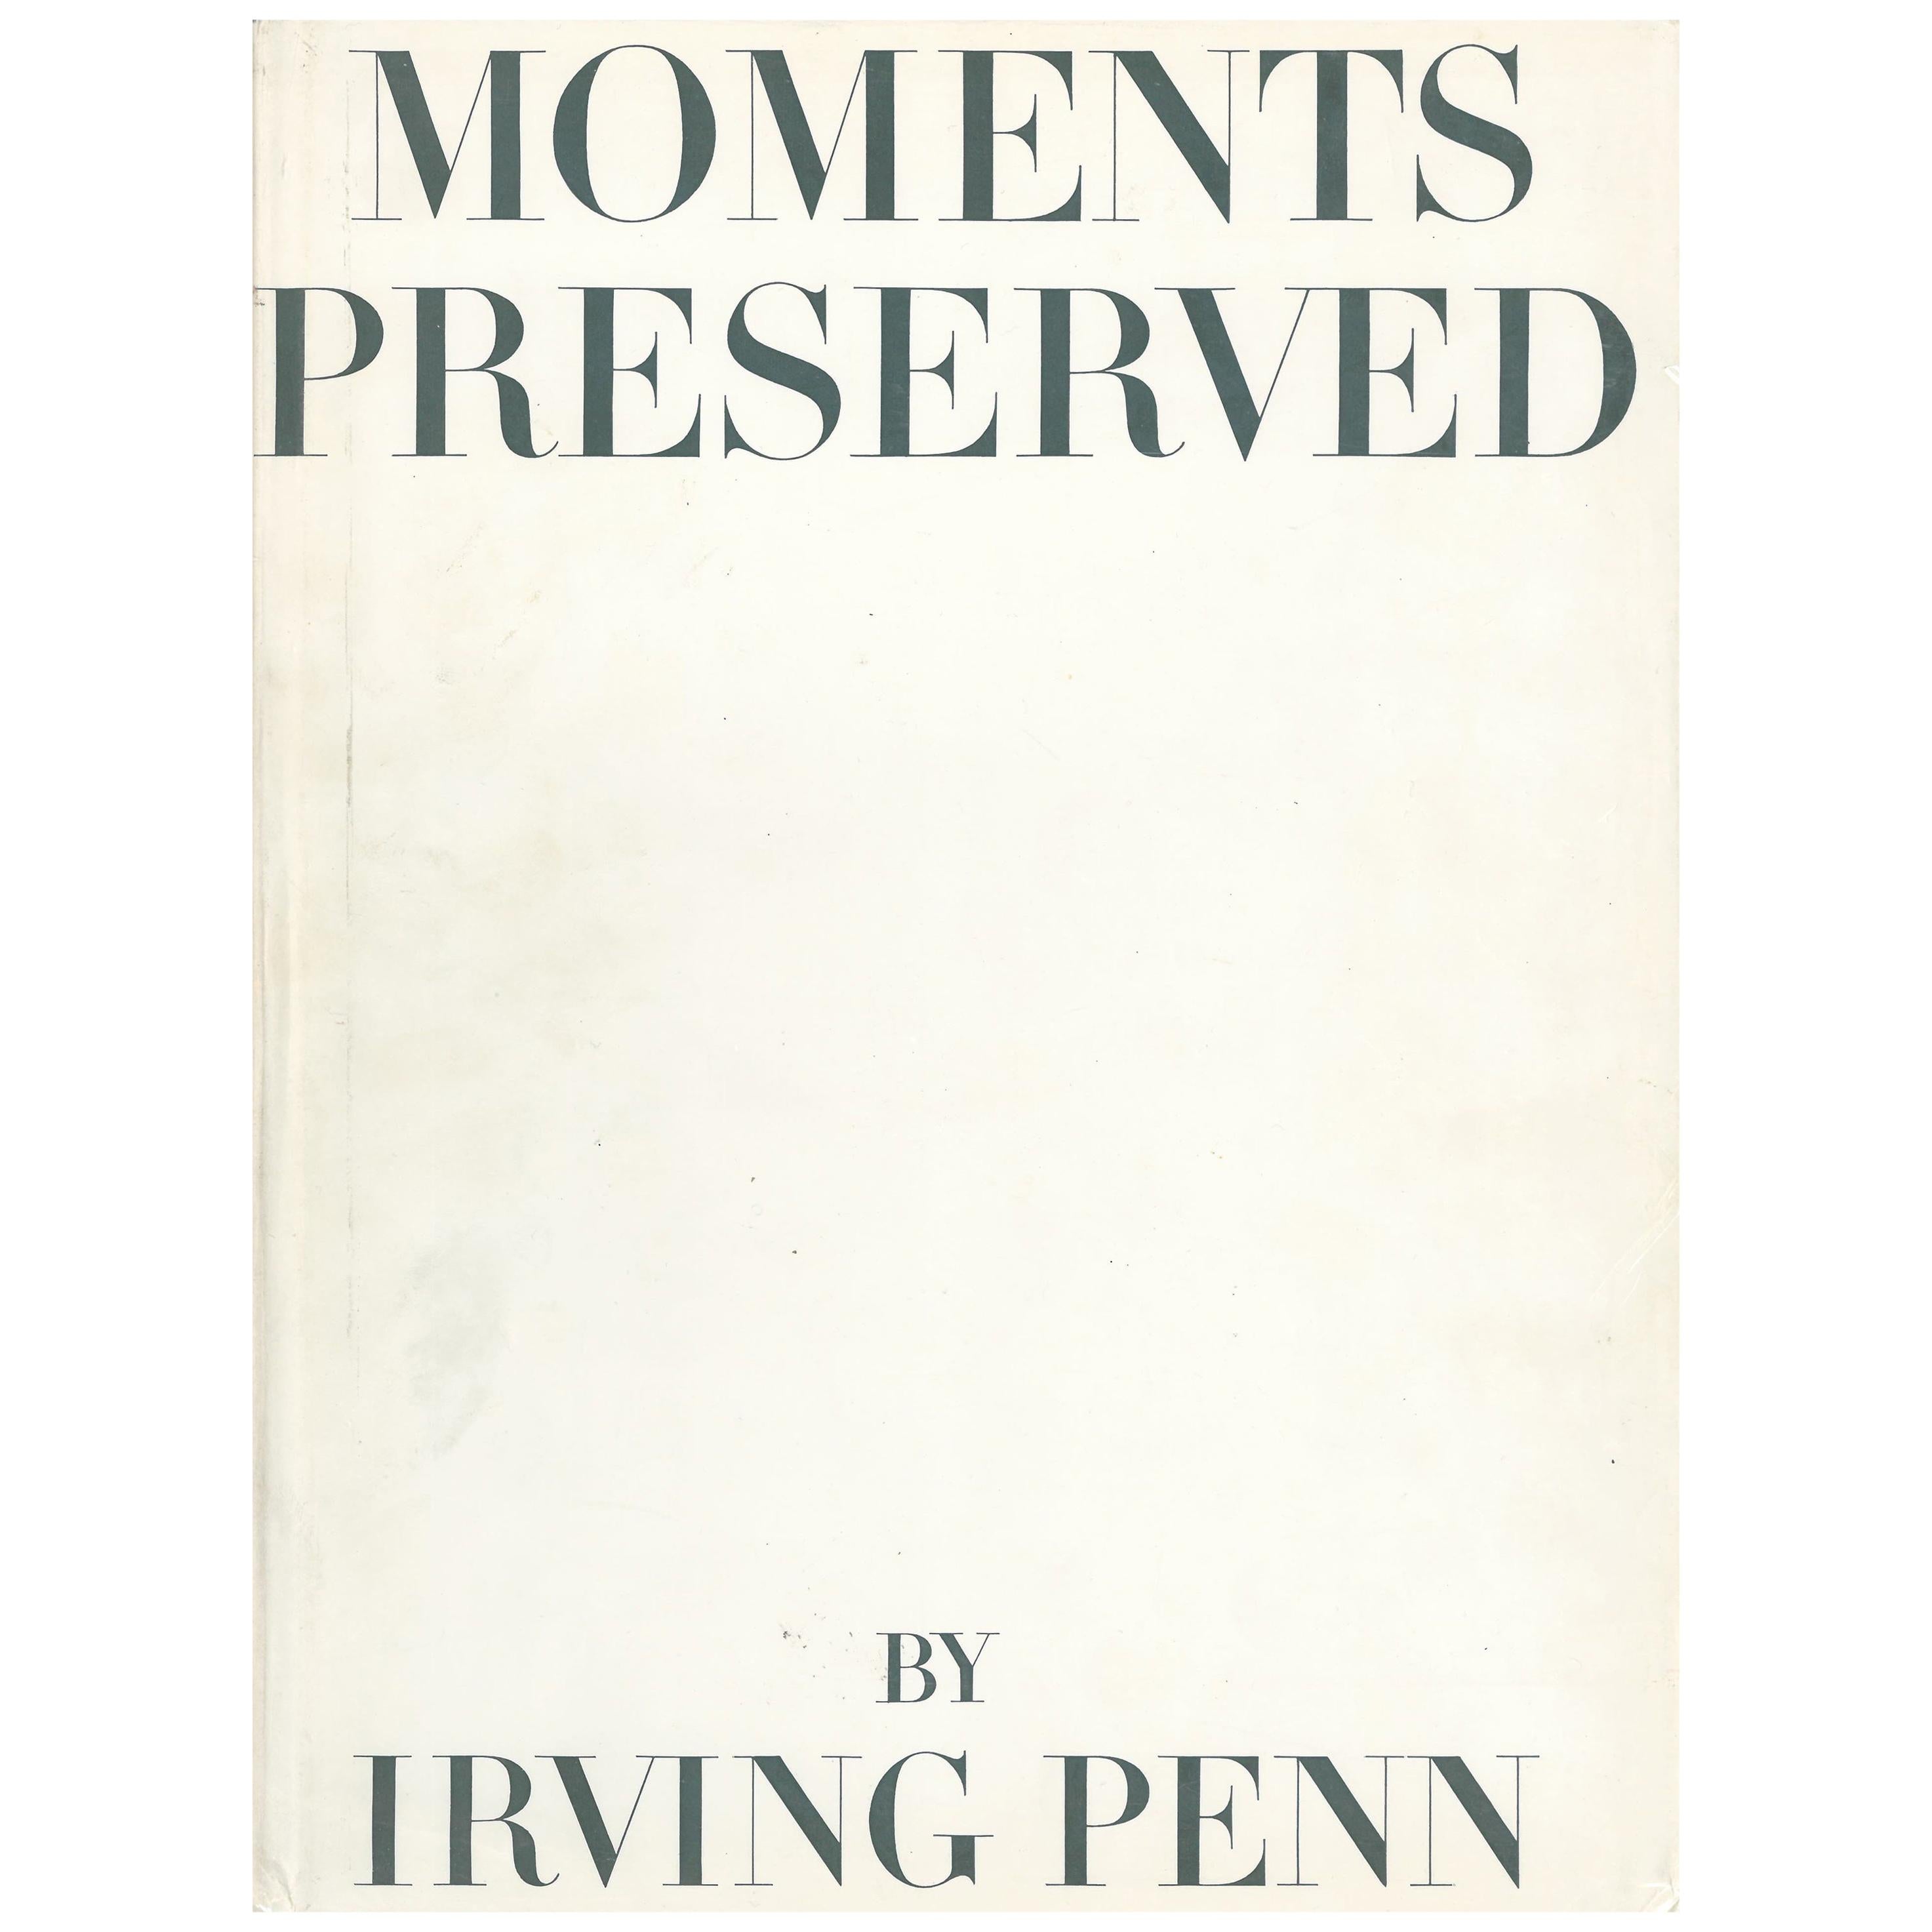 Moments Preserved by Irving Penn (Book)